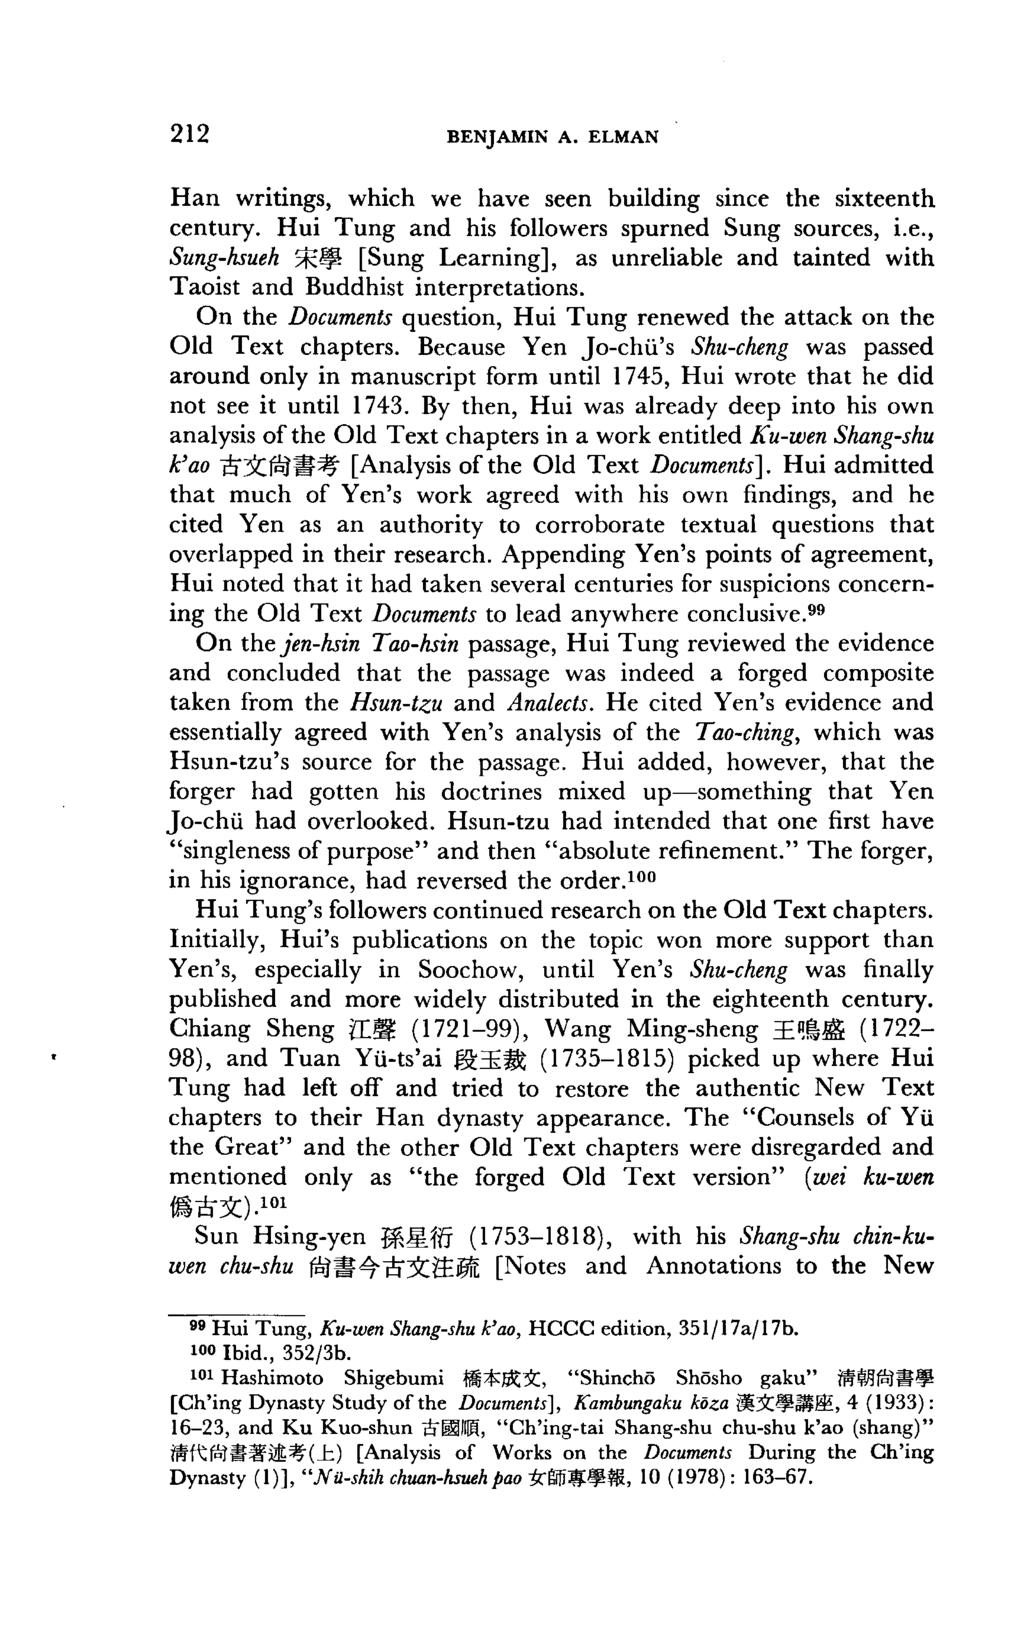 212 Han writings, which we have seen building since the sixteenth century. Hui Tung and his followers spurned Sung sources, i.e., Sung-hsueh [Sung Learning], as unreliable and tainted with Taoist and Buddhist interpretations.